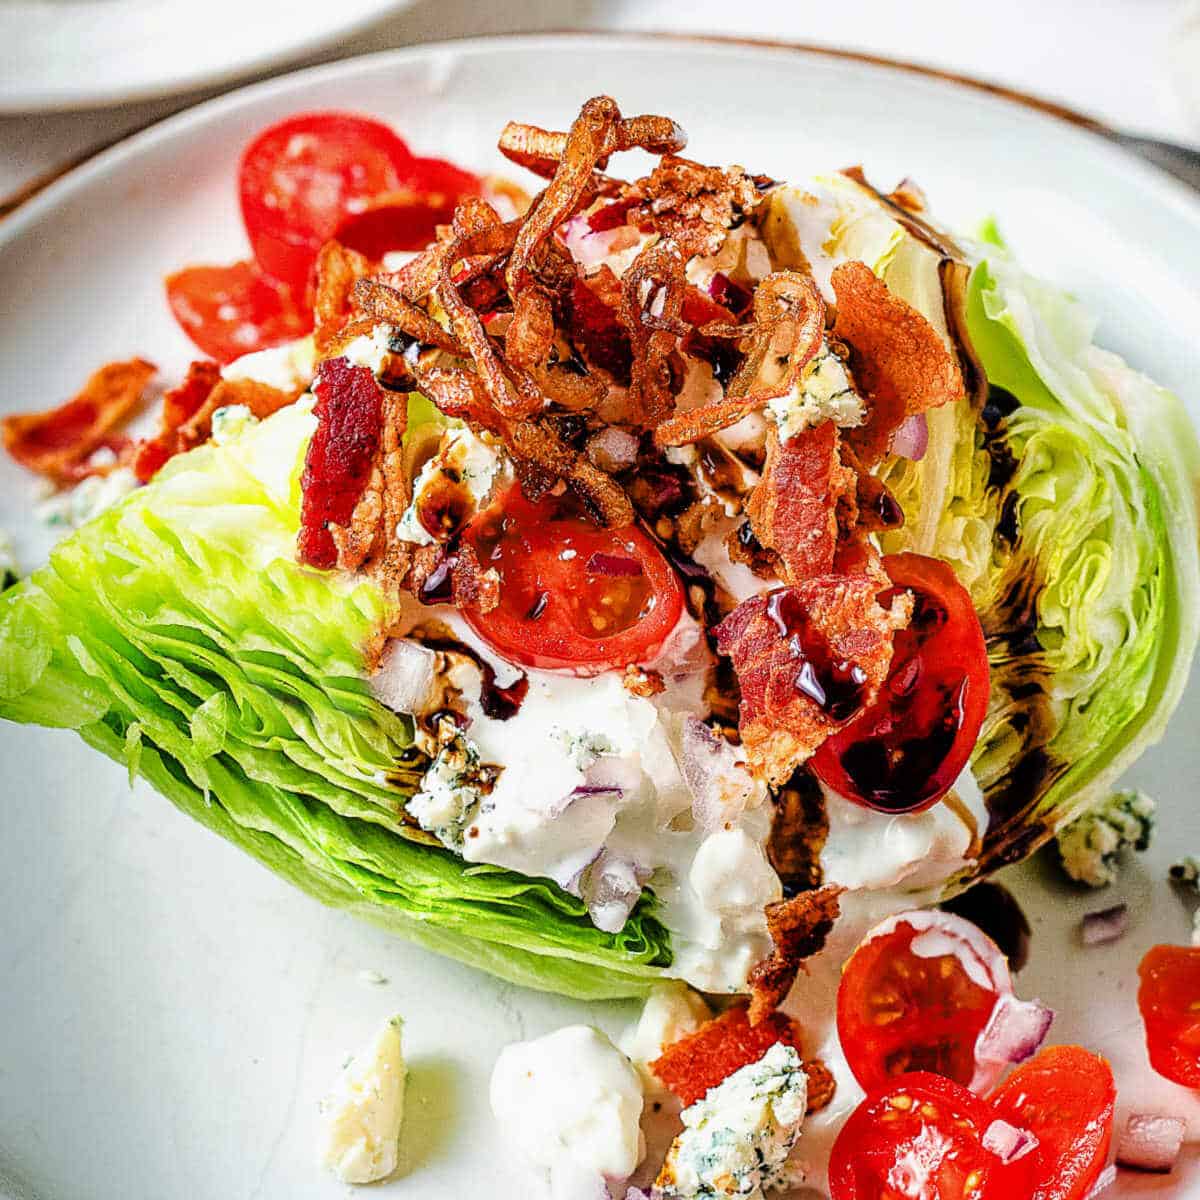 A wedge salad on a plate with bacon.